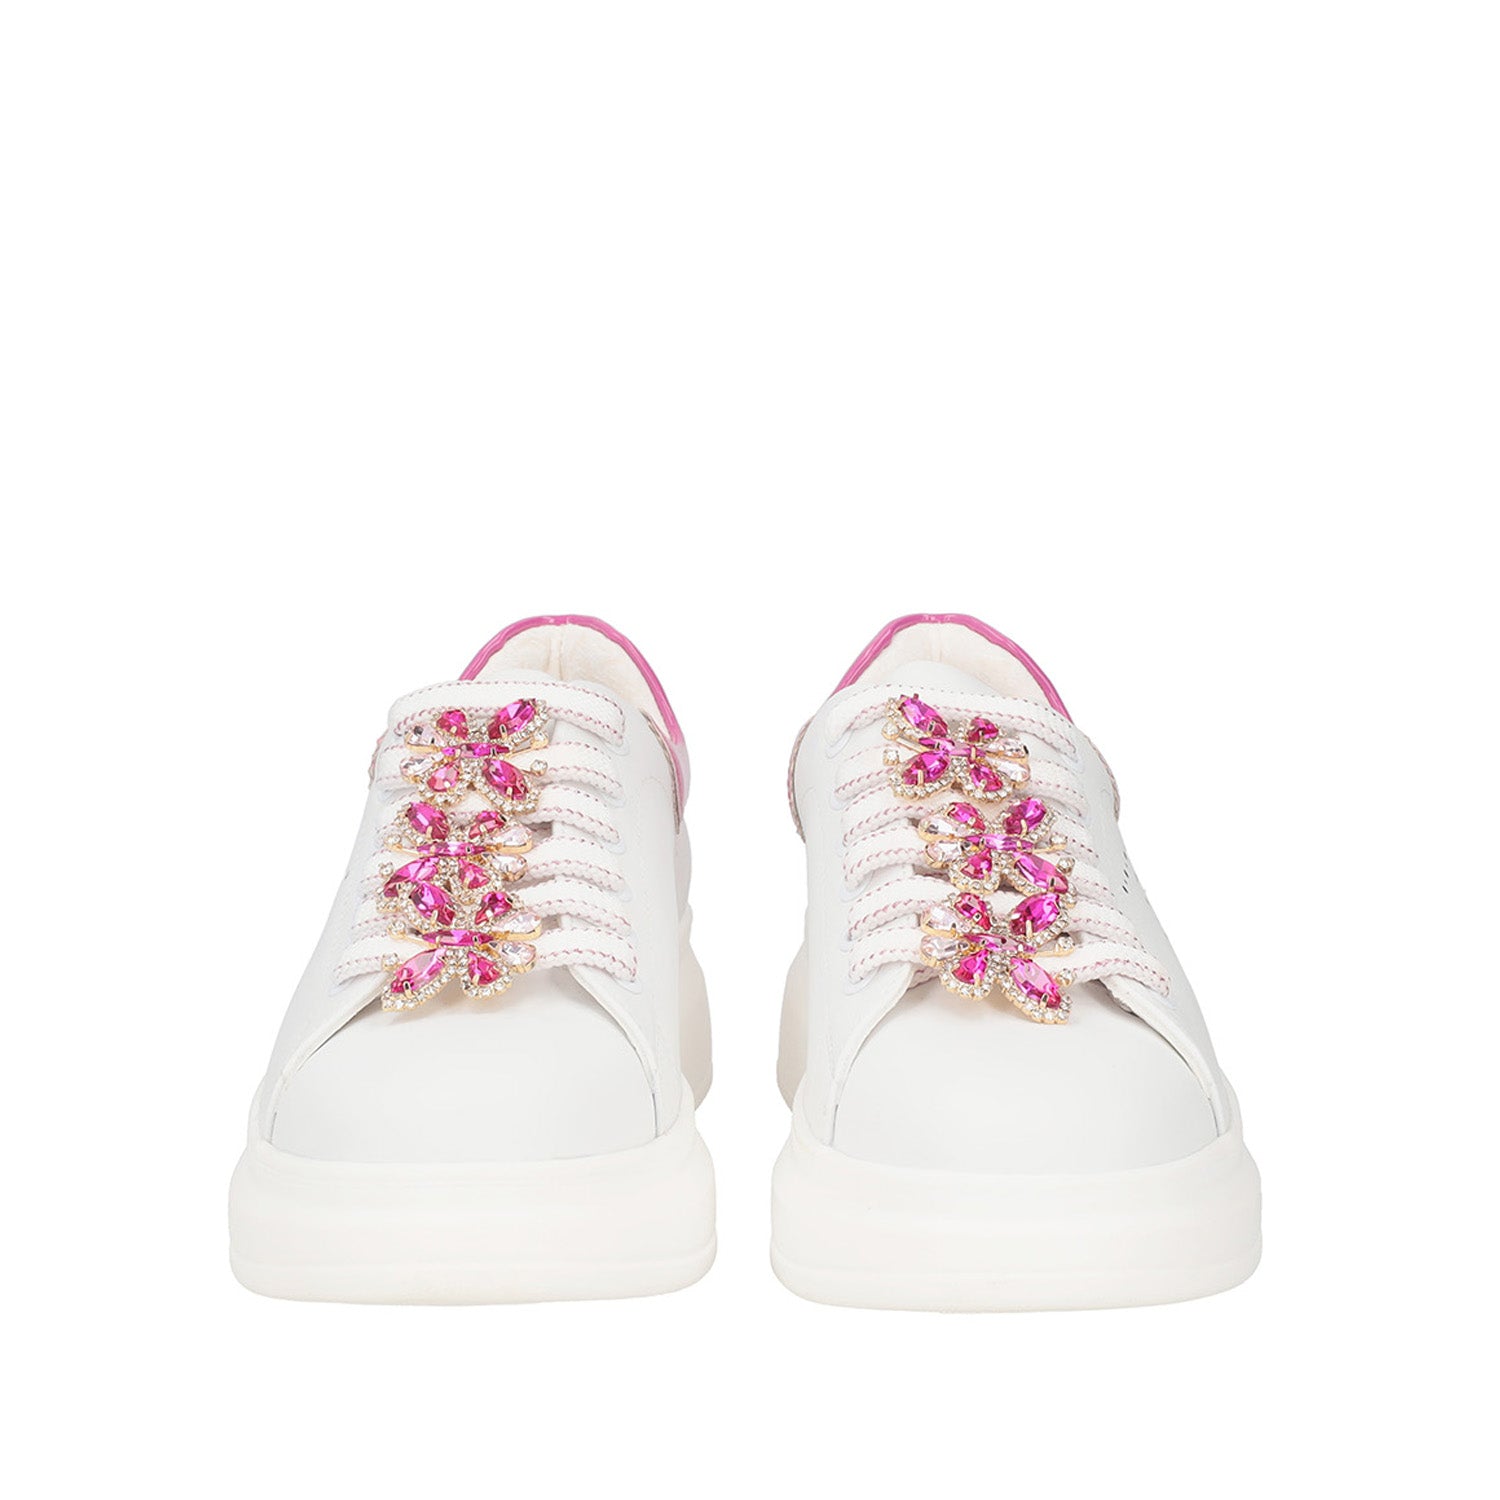 WHITE/FUXIA GLAMOUR SNEAKER WITH BUTTERFLY ACCESSORY